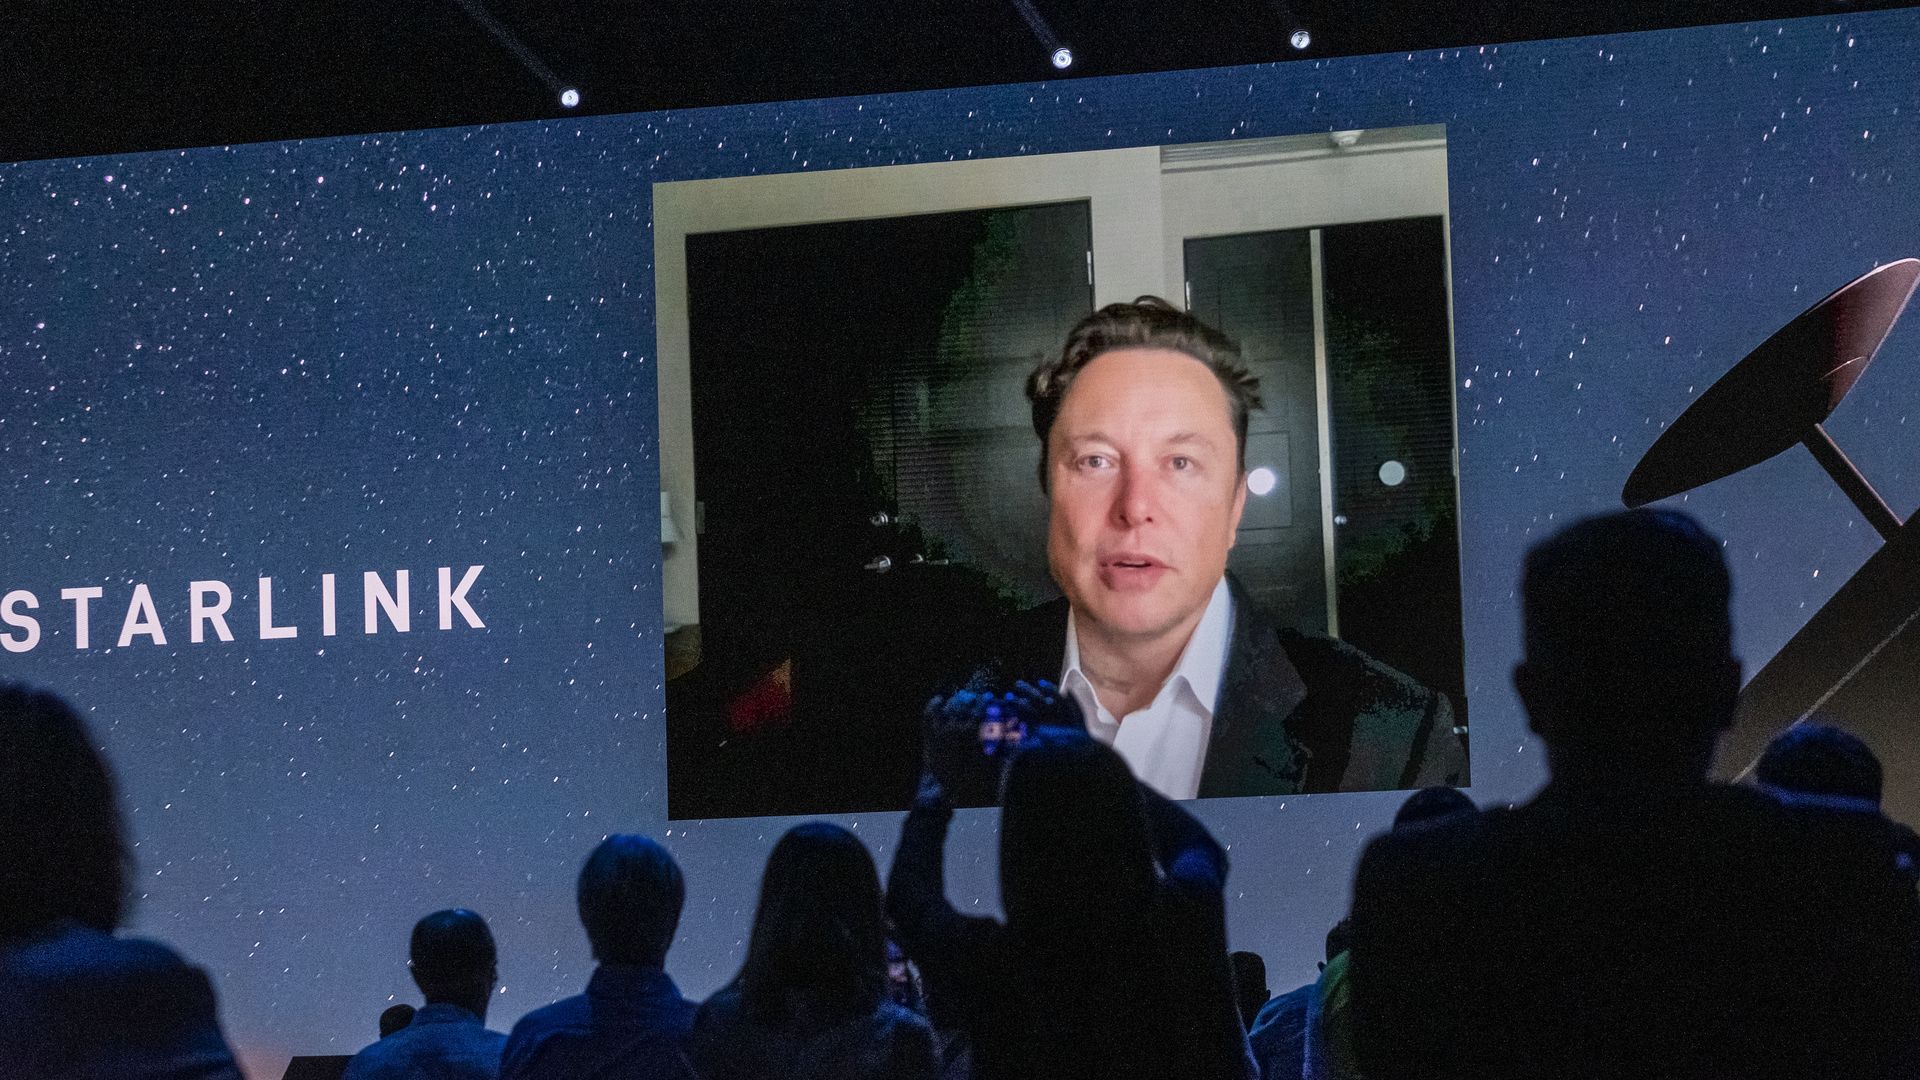 Elon Musk gives a keynote speech via video conference at the Mobile World Congress fair in Barcelona, Spain, last June. Photo: Jose Colon/Getty Images